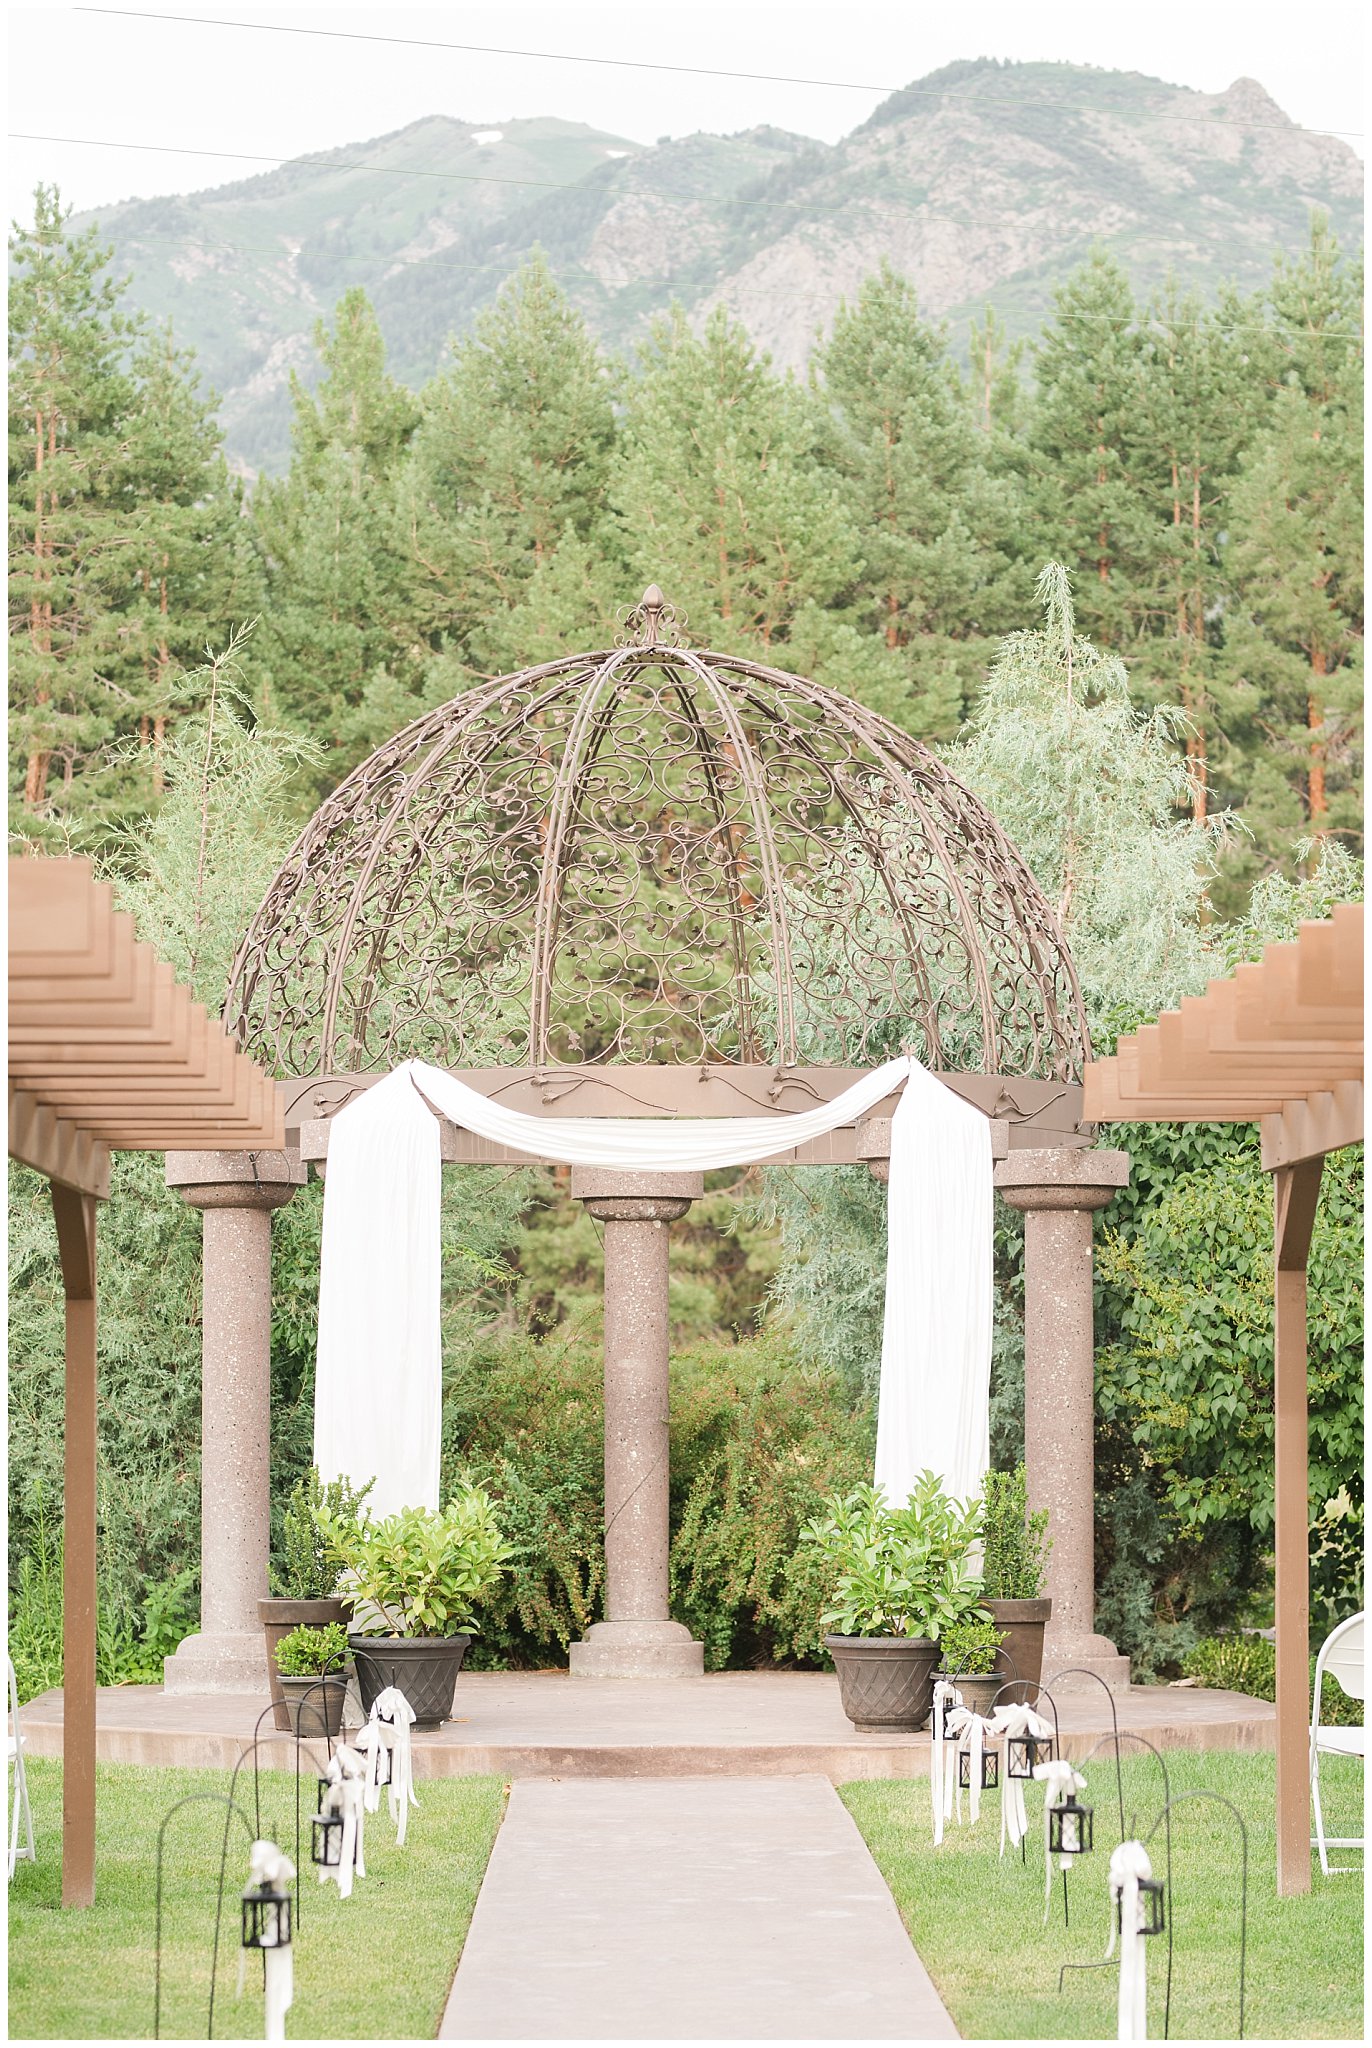 Ceremony Site | Oak Hills Reception and Event Center | Utah Wedding Venue | Jessie and Dallin Photography